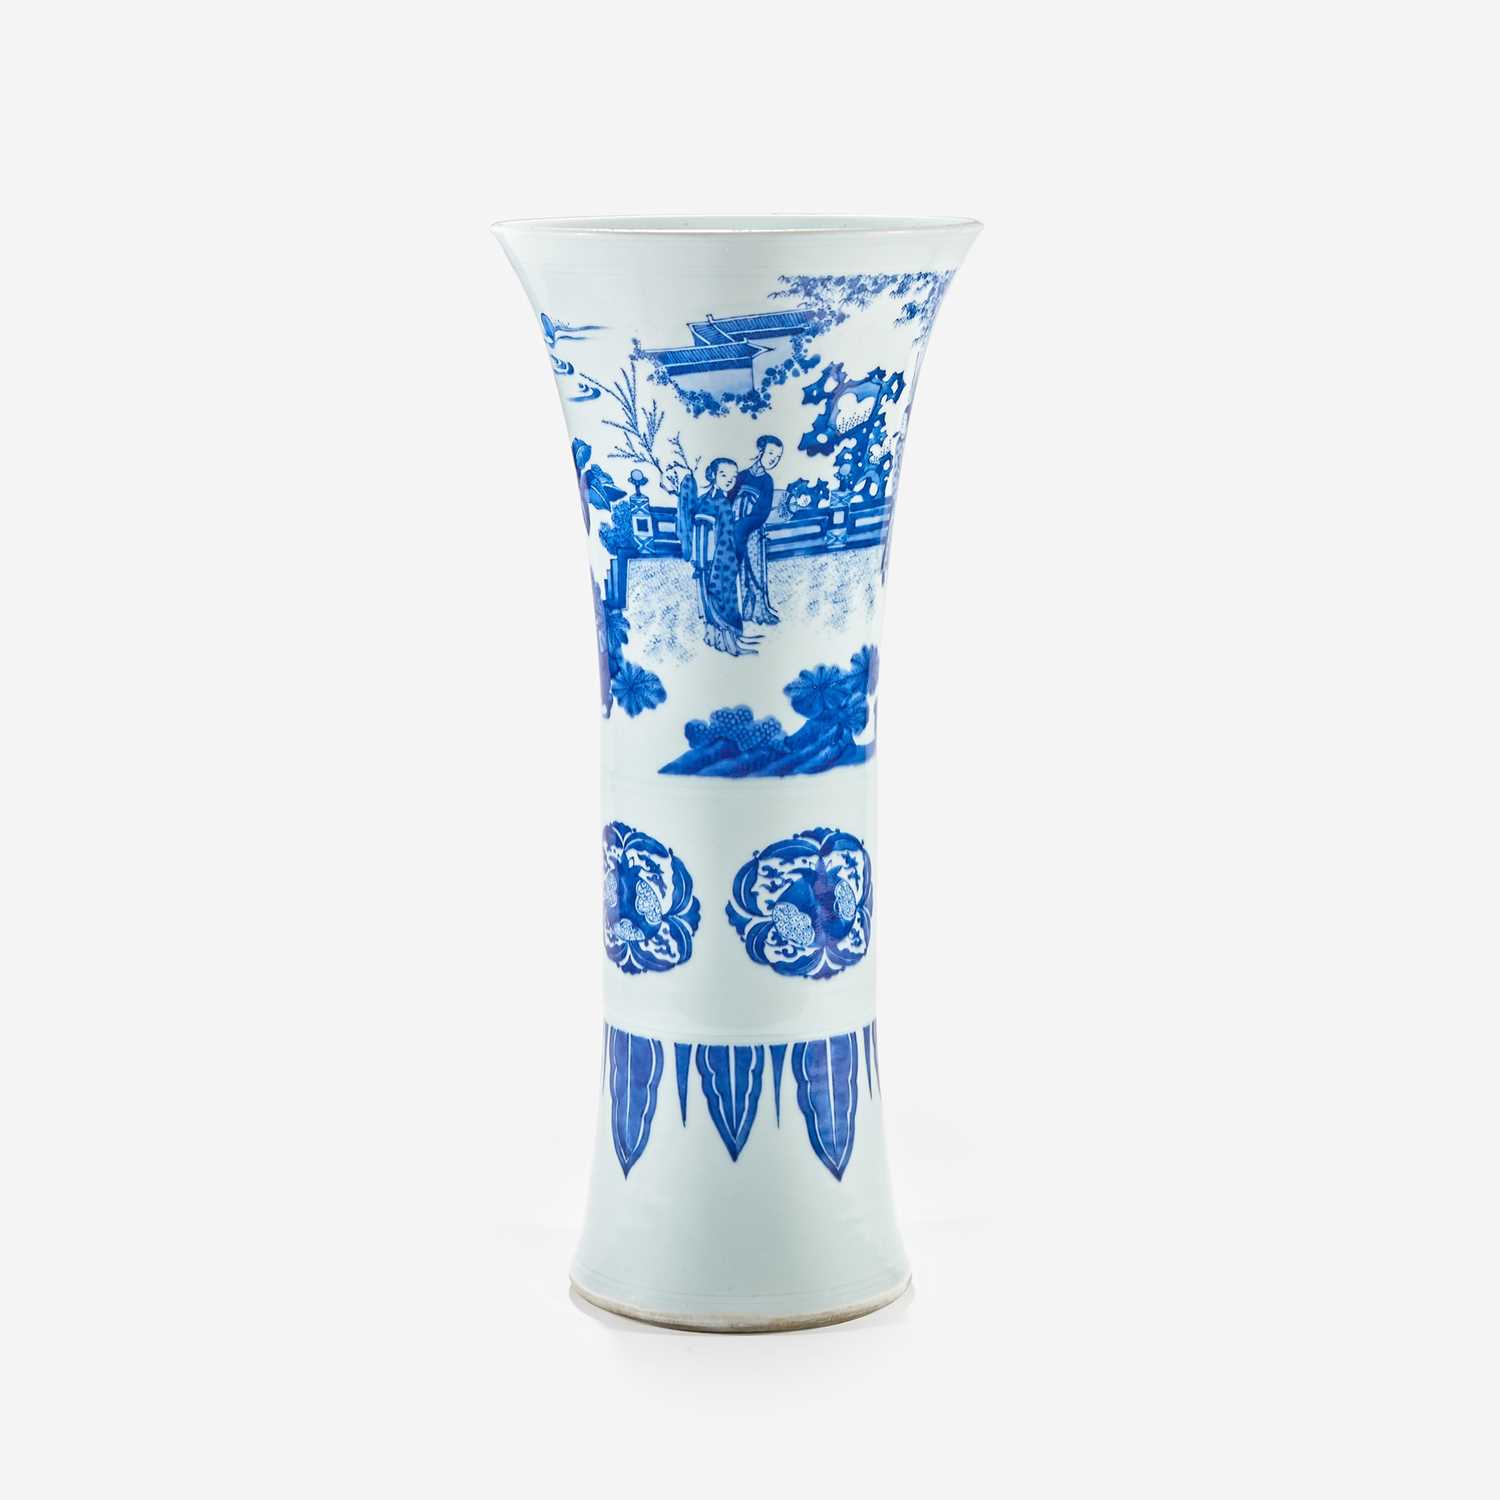 Lot 8 - A large finely-decorated Chinese blue and white porcelain "Romance of the Western Chamber" gu-form beaker vase